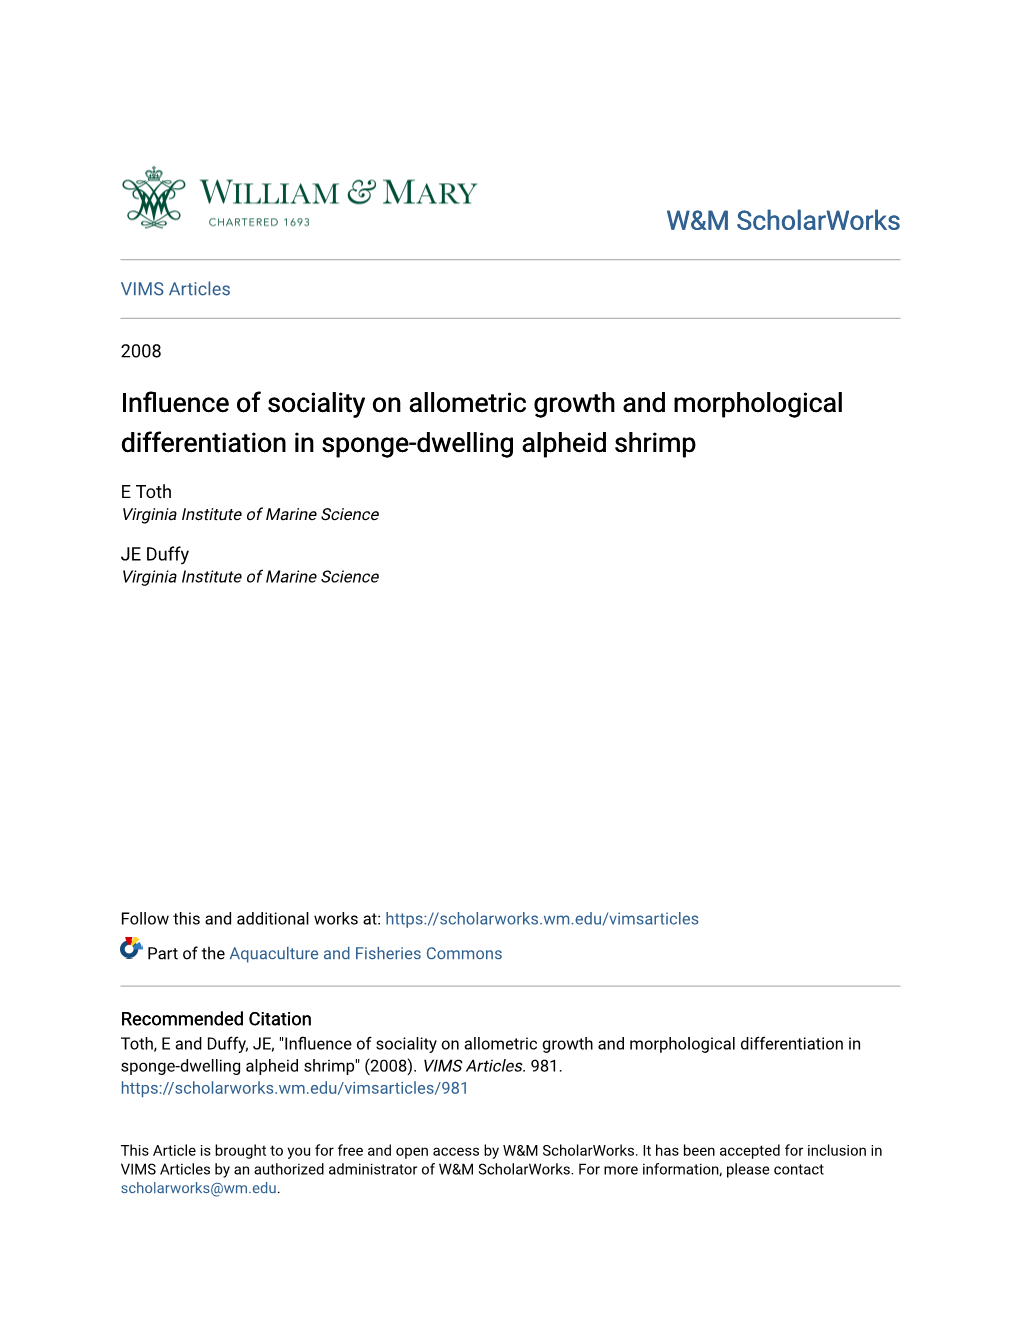 Influence of Sociality on Allometric Growth and Morphological Differentiation in Sponge-Dwelling Alpheid Shrimp